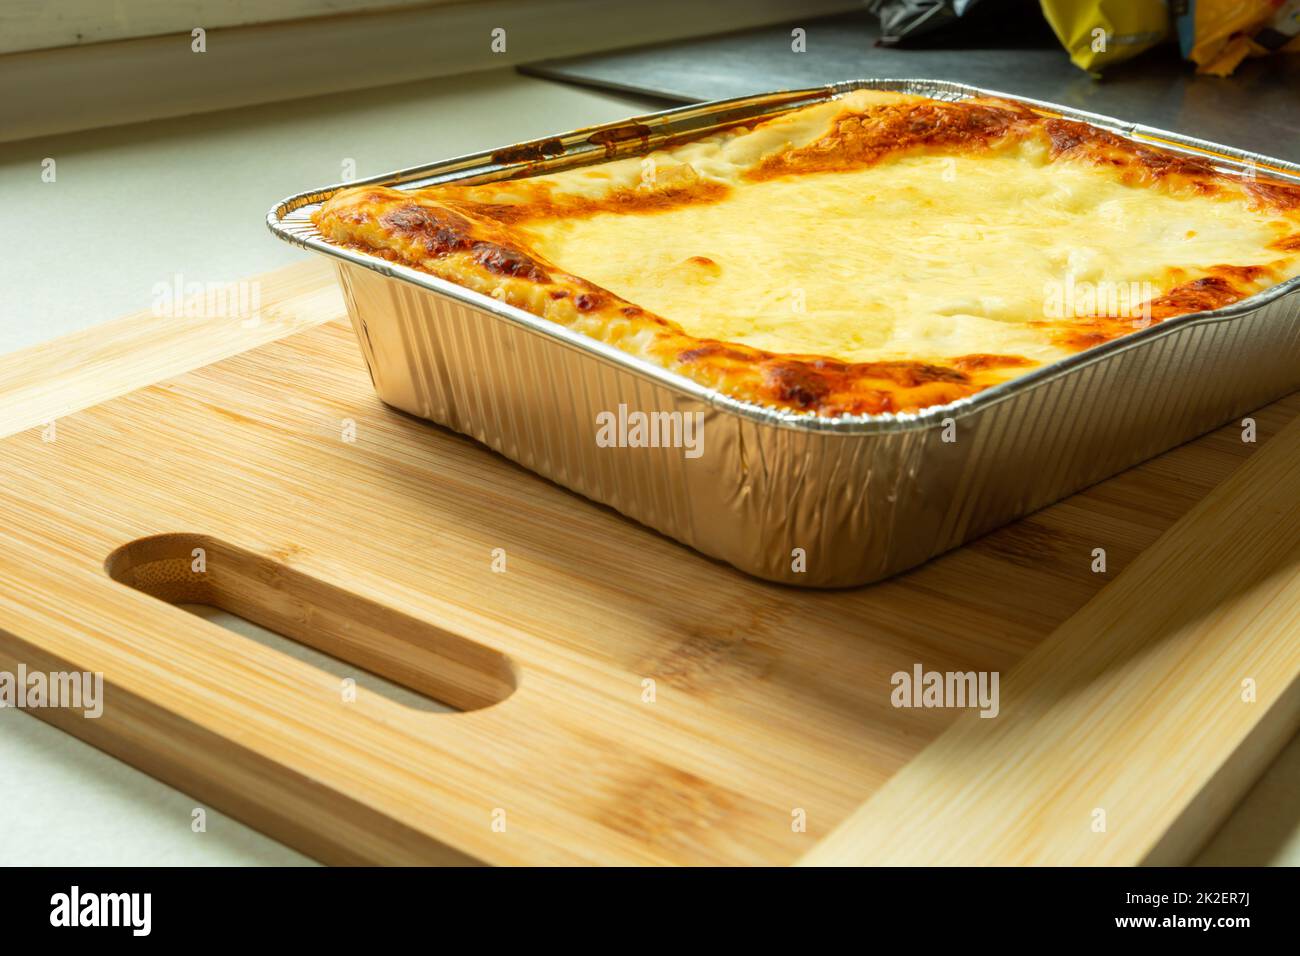 Cakes in foil pans stock photo. Image of homemade, brown - 180386150